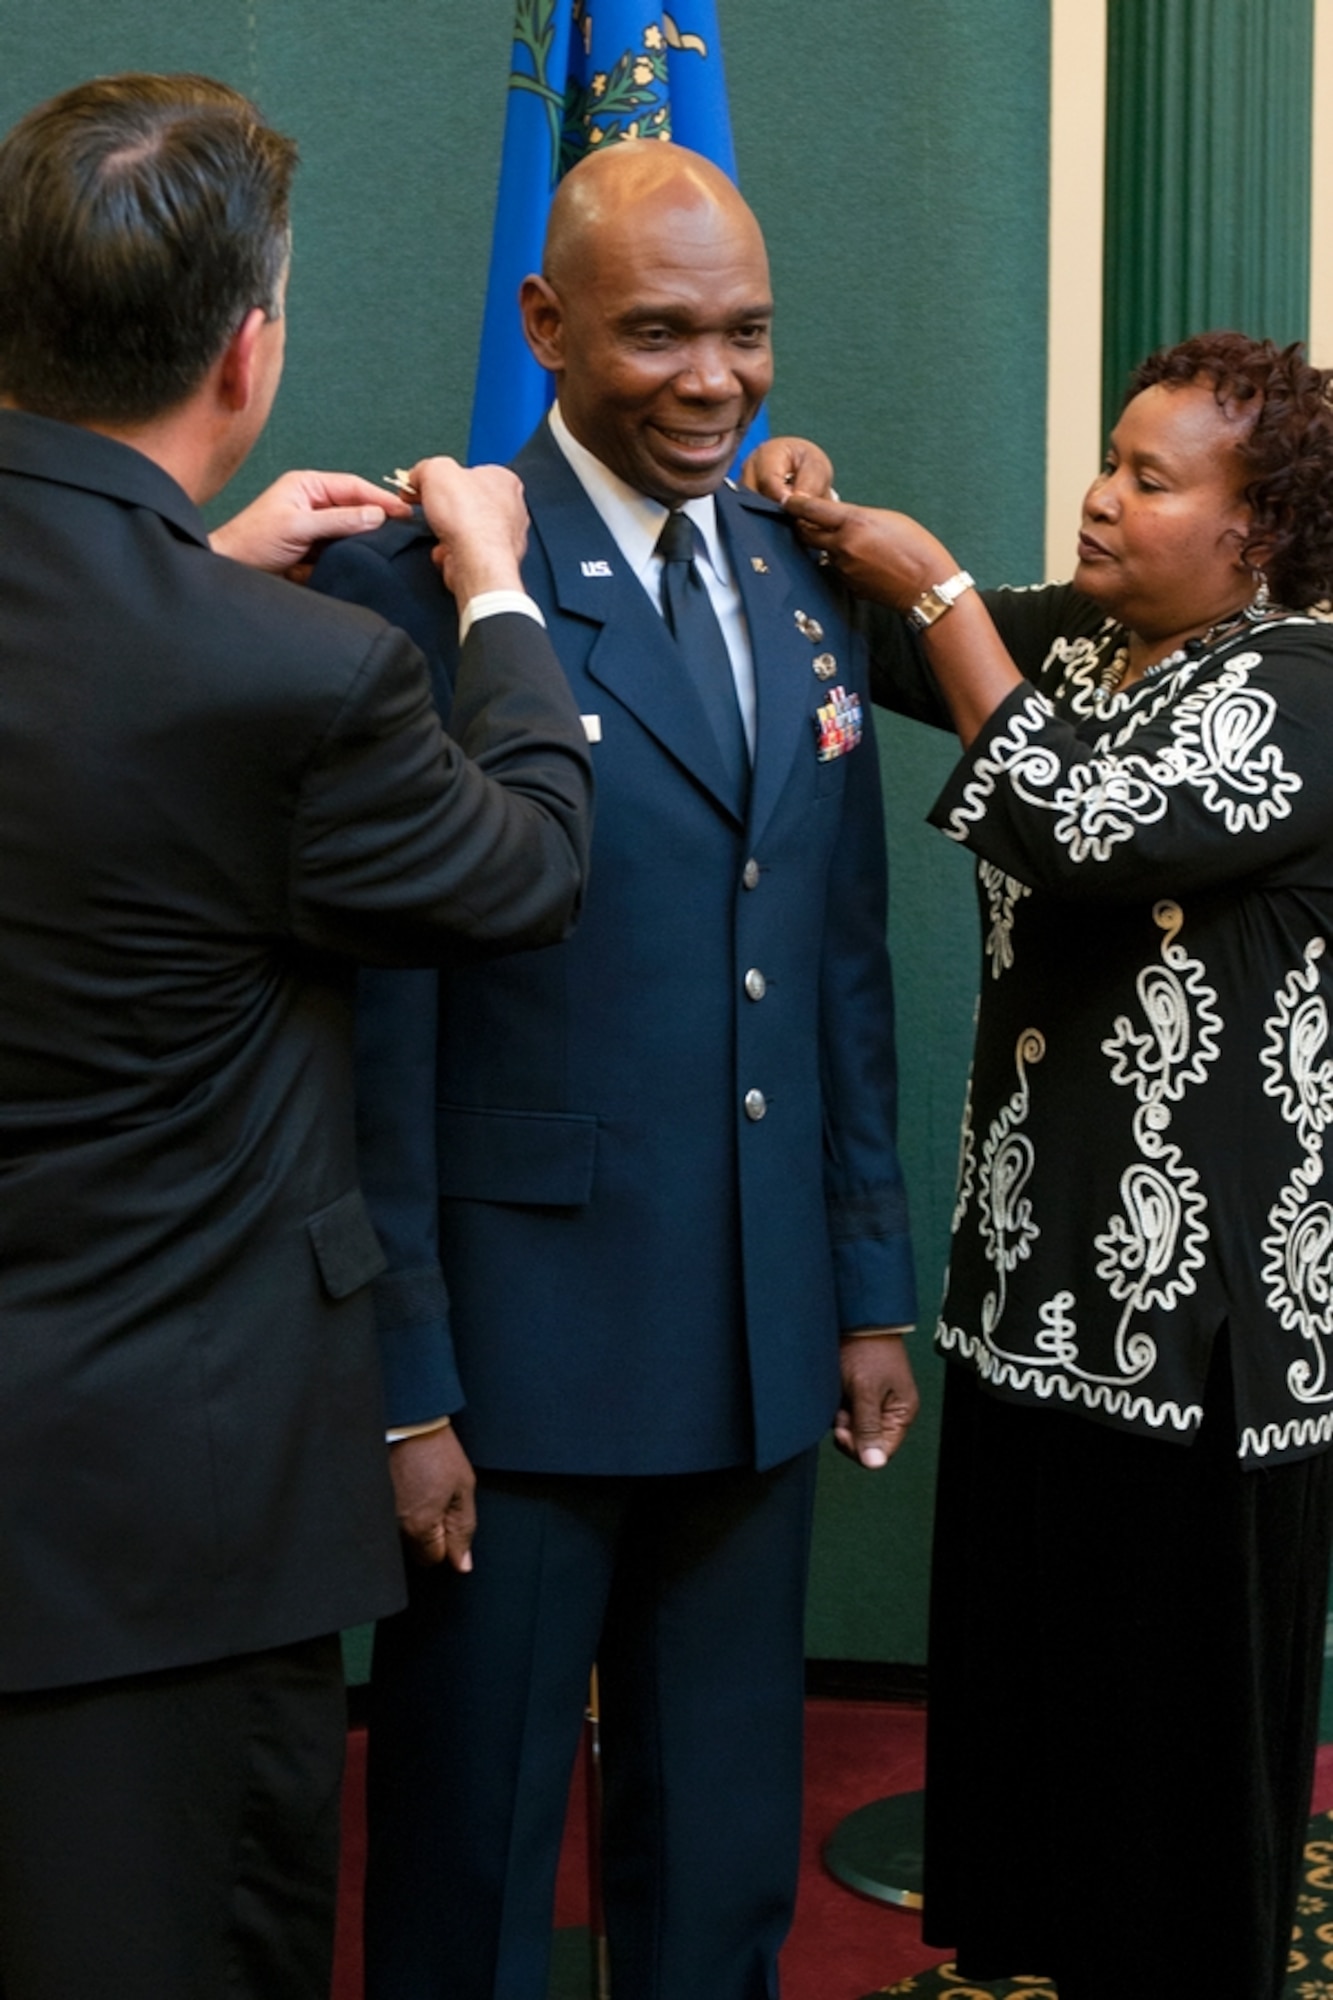 Ondra Berry, center, receives his stars marking his promotion to brigadier general from Gov. Brian Sandoval and his wife Margo Berry during a ceremony in the Guinn Room at the Nevada Capitol on Nov.12. Berry is the first African-American general in the Nevada Guard and is now the Nevada Air Guard’s assistant adjutant general.
Photo by Staff Sgt. Mike Getten, Joint Force Headquarters Public Affairs
